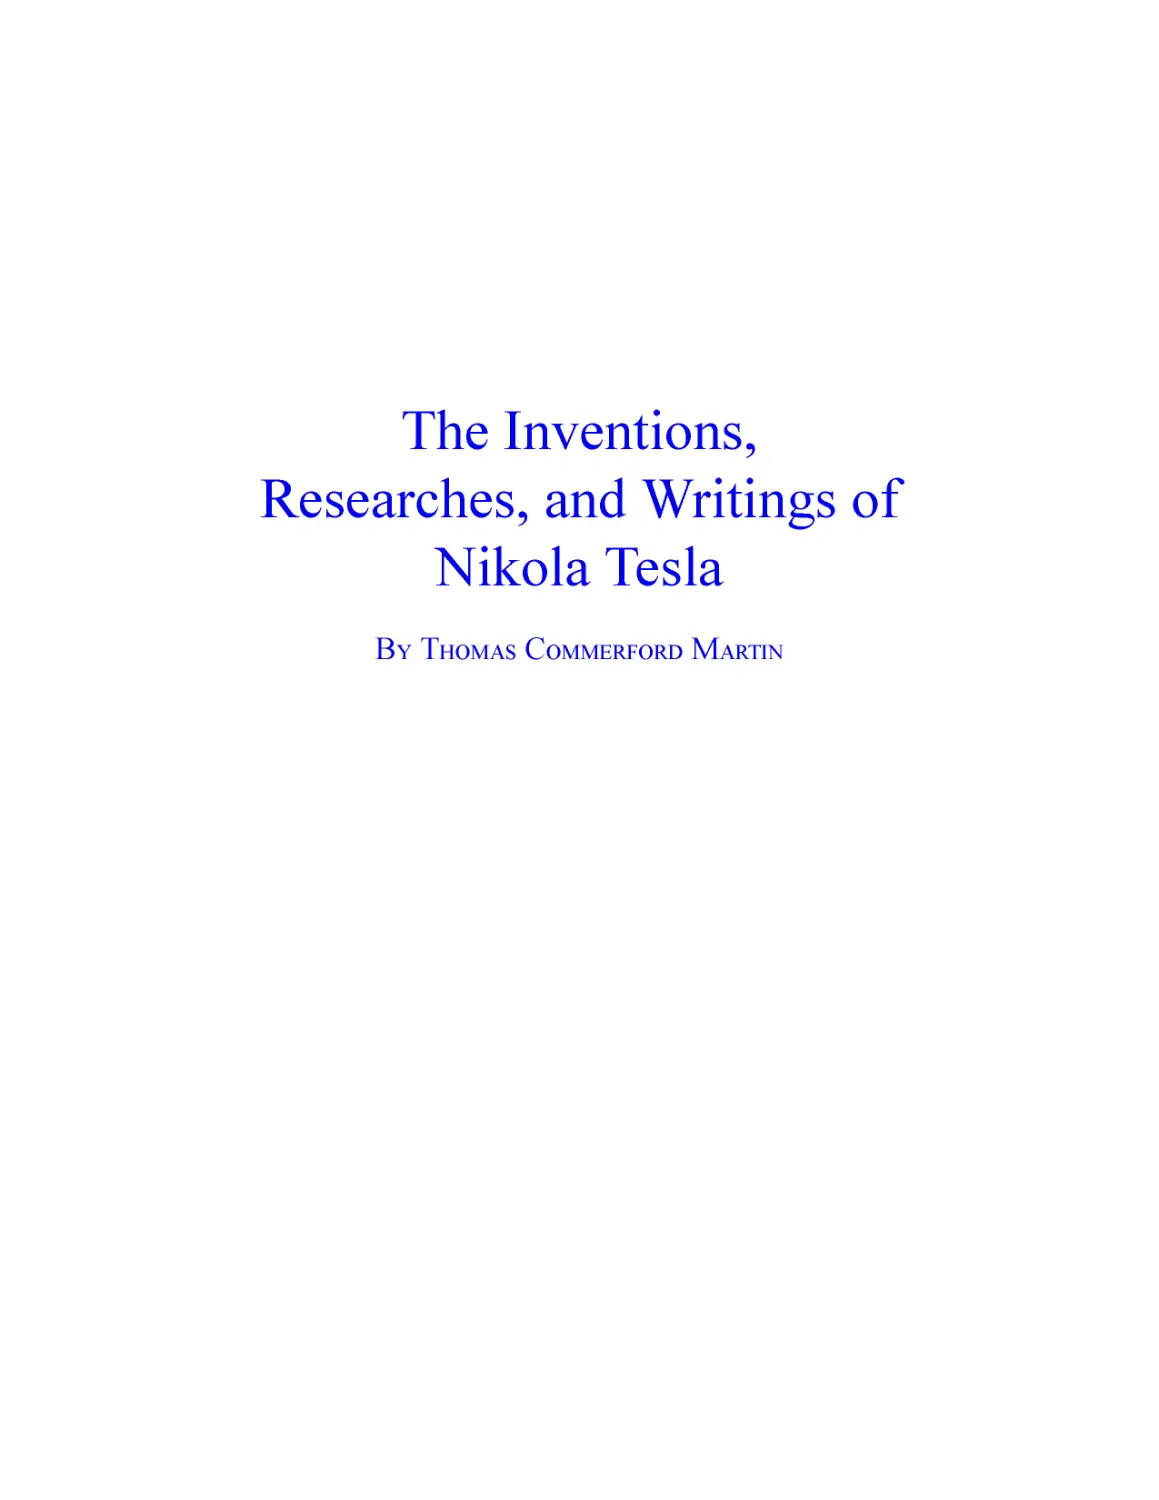 ﻿The Inventions, Researches, and Writings of Nikola Tesl